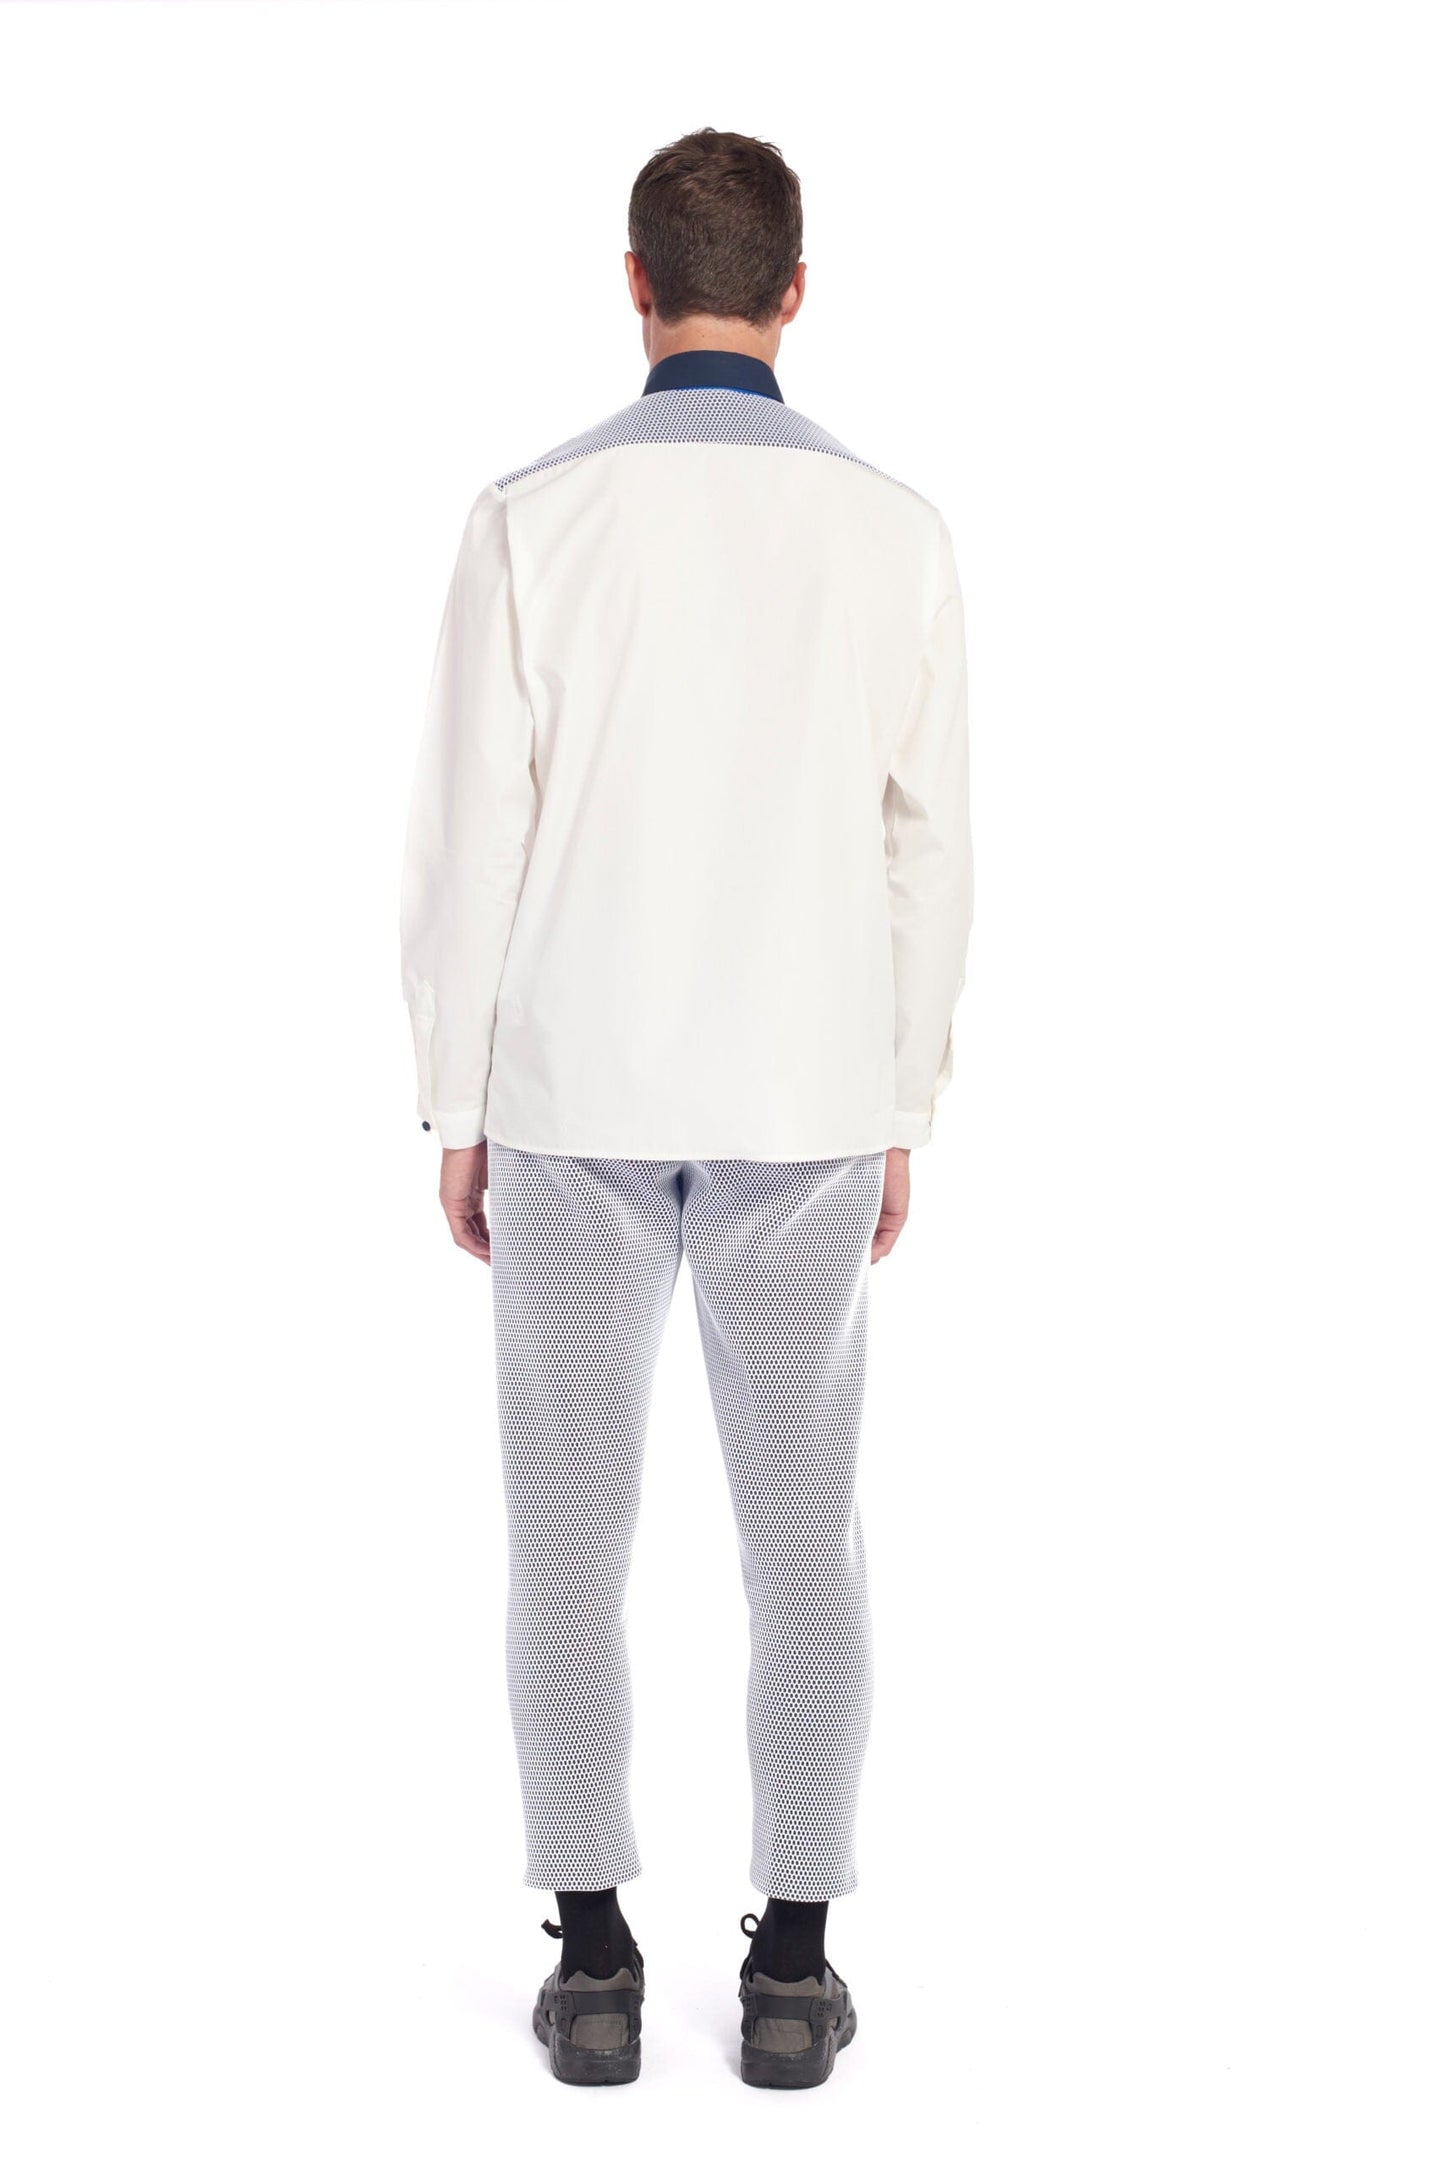 Soulou - White & Blue Shirt LaurenceAirline 